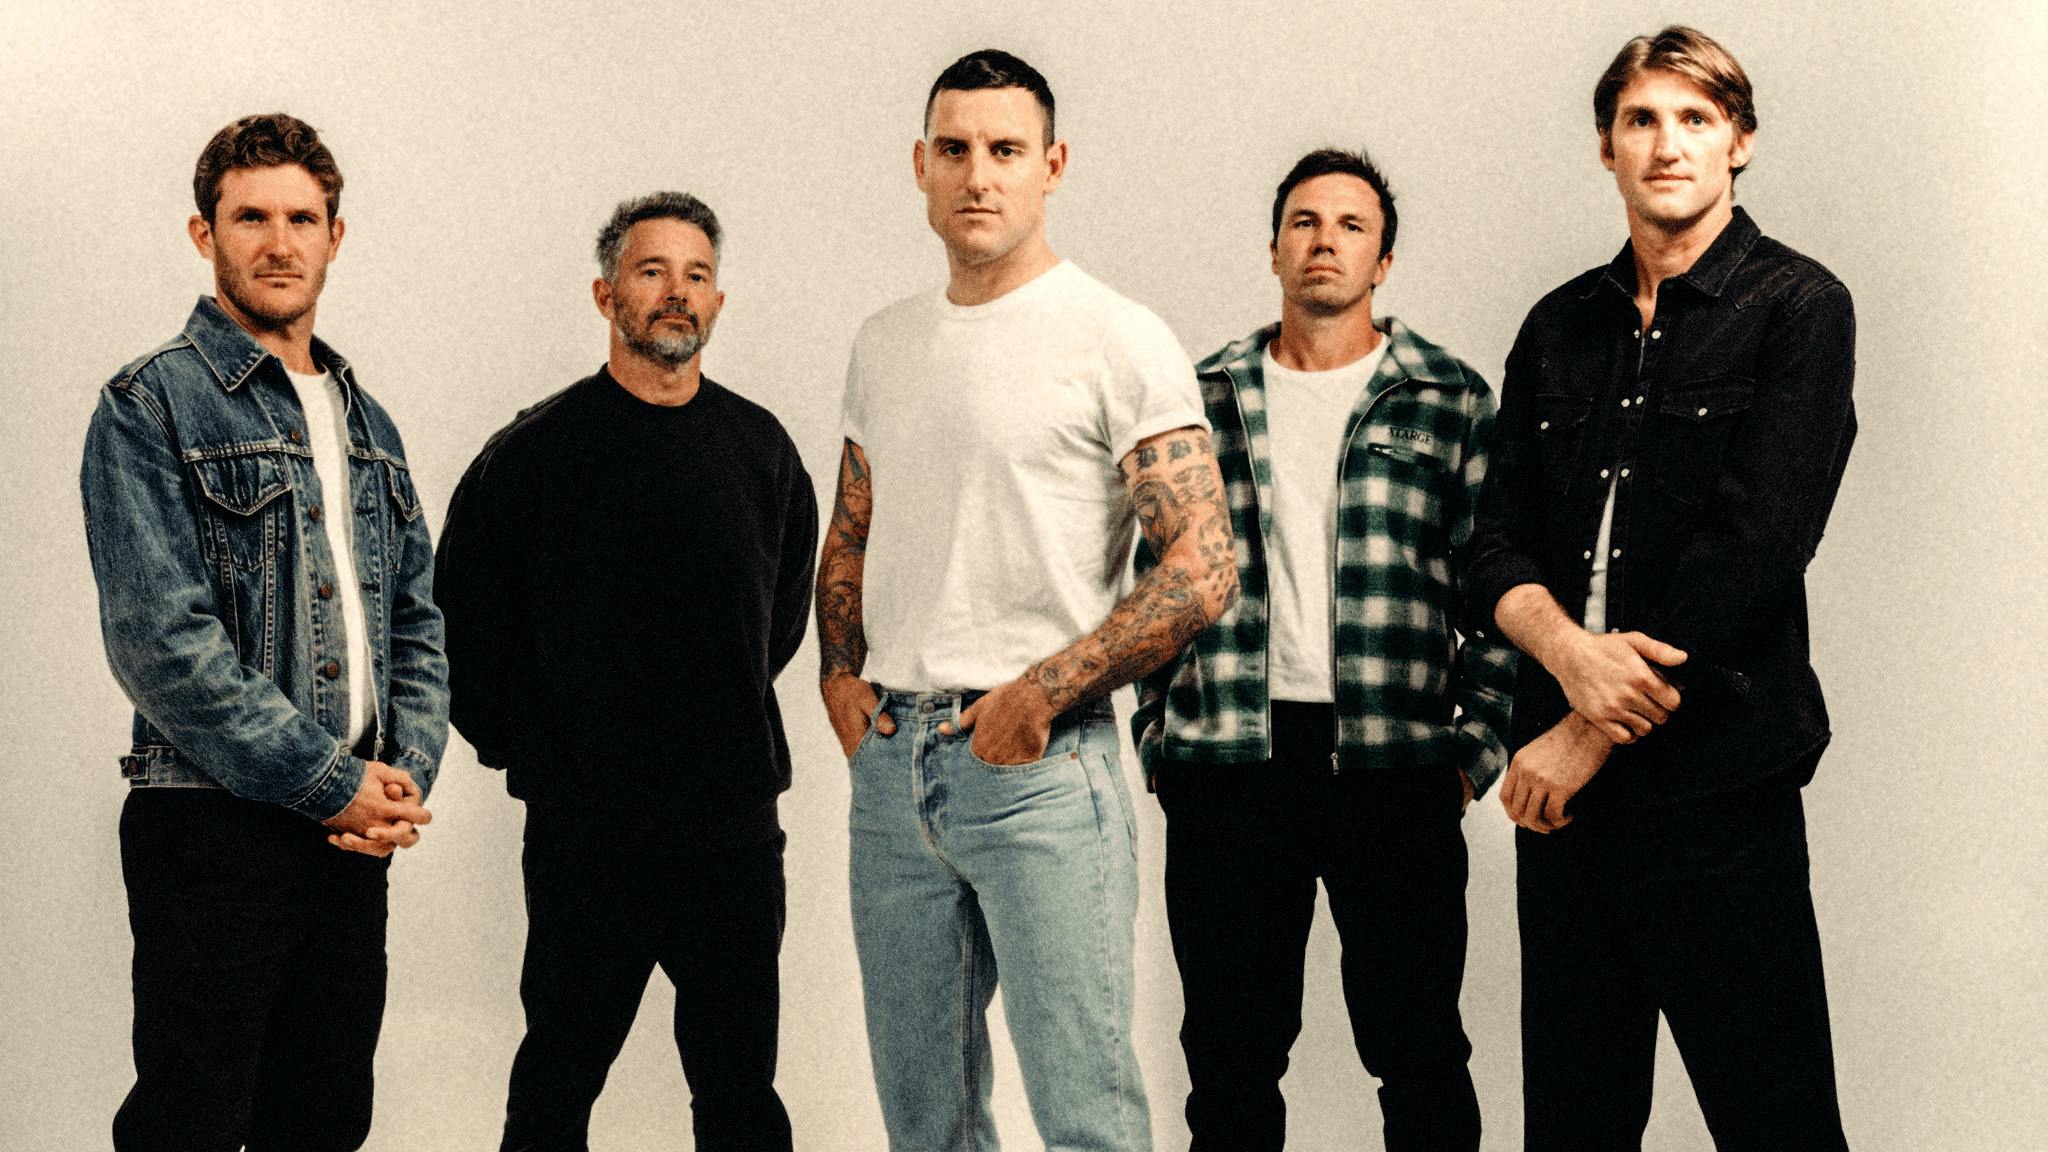 Here’s the setlist from Parkway Drive’s U.S. tour